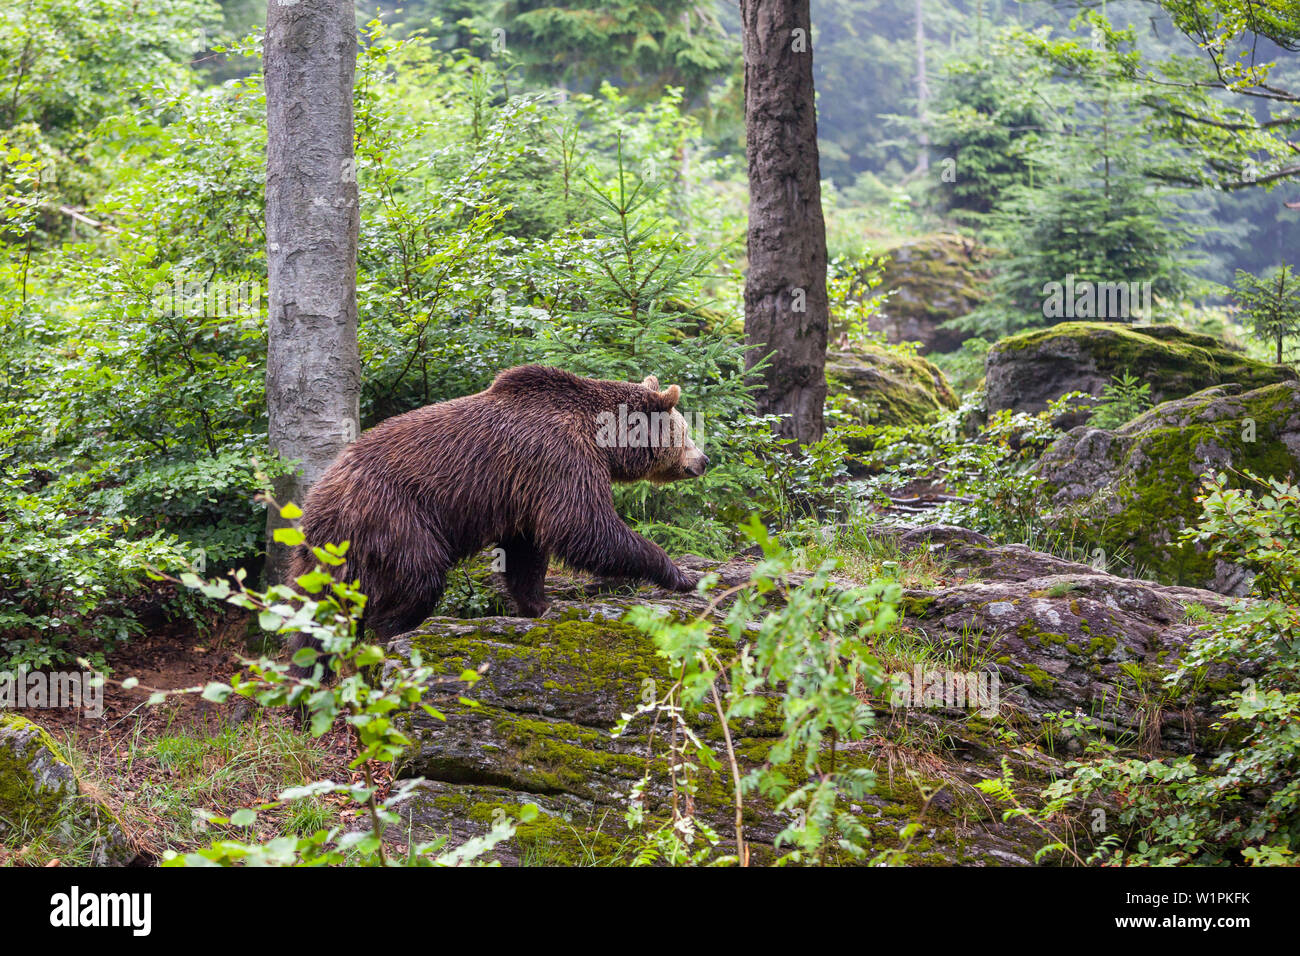 Brown Bear in forest, Ursus arctos, Bavarian Forest National Park, Bavaria, Germany, Europe, captive Stock Photo